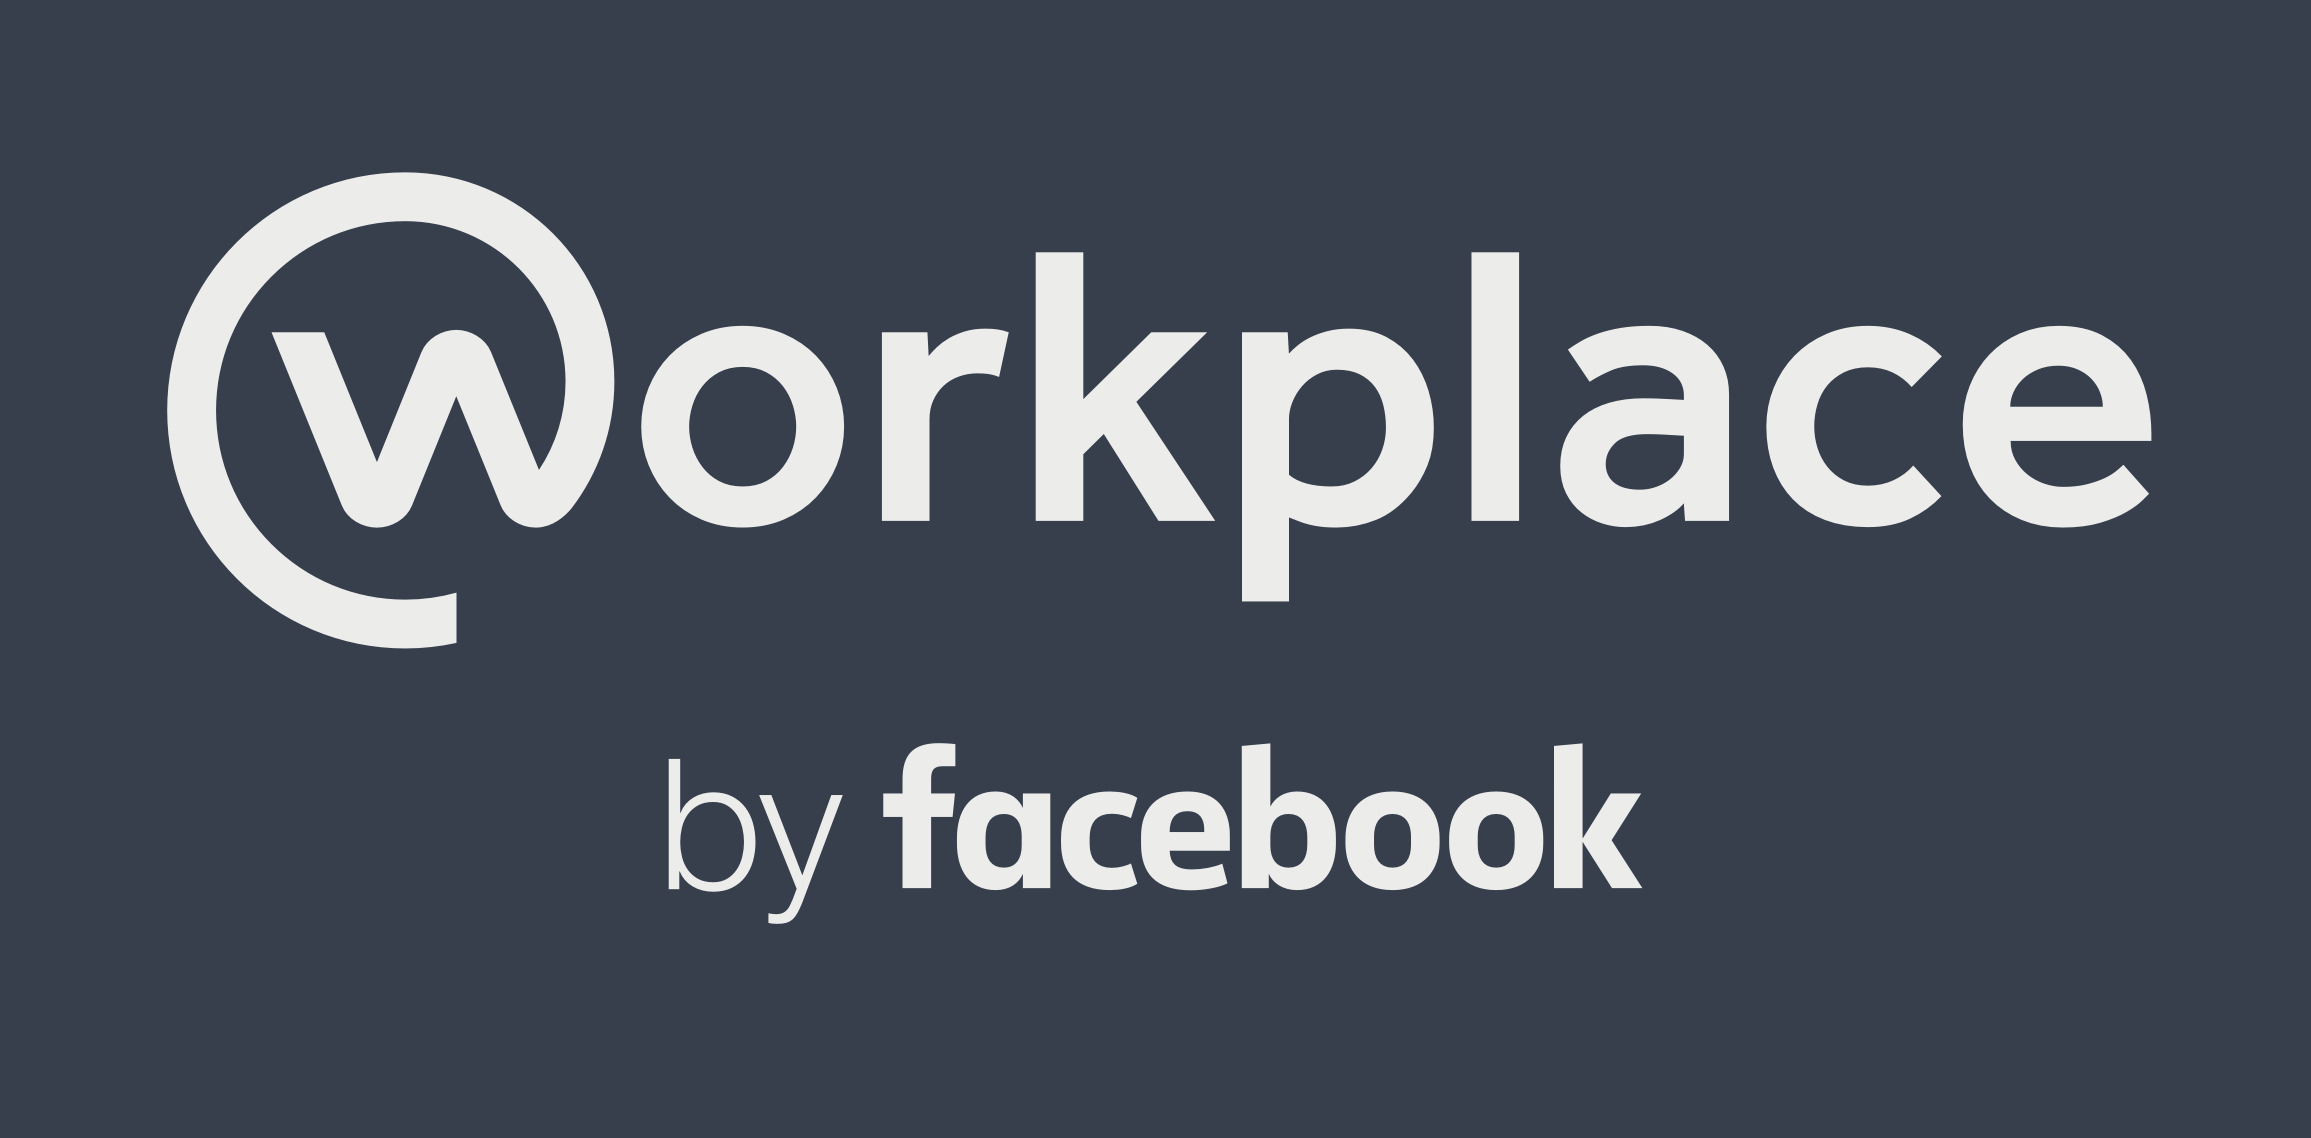 01_Workplace_By-Facebook_Light-on-Grey1.png